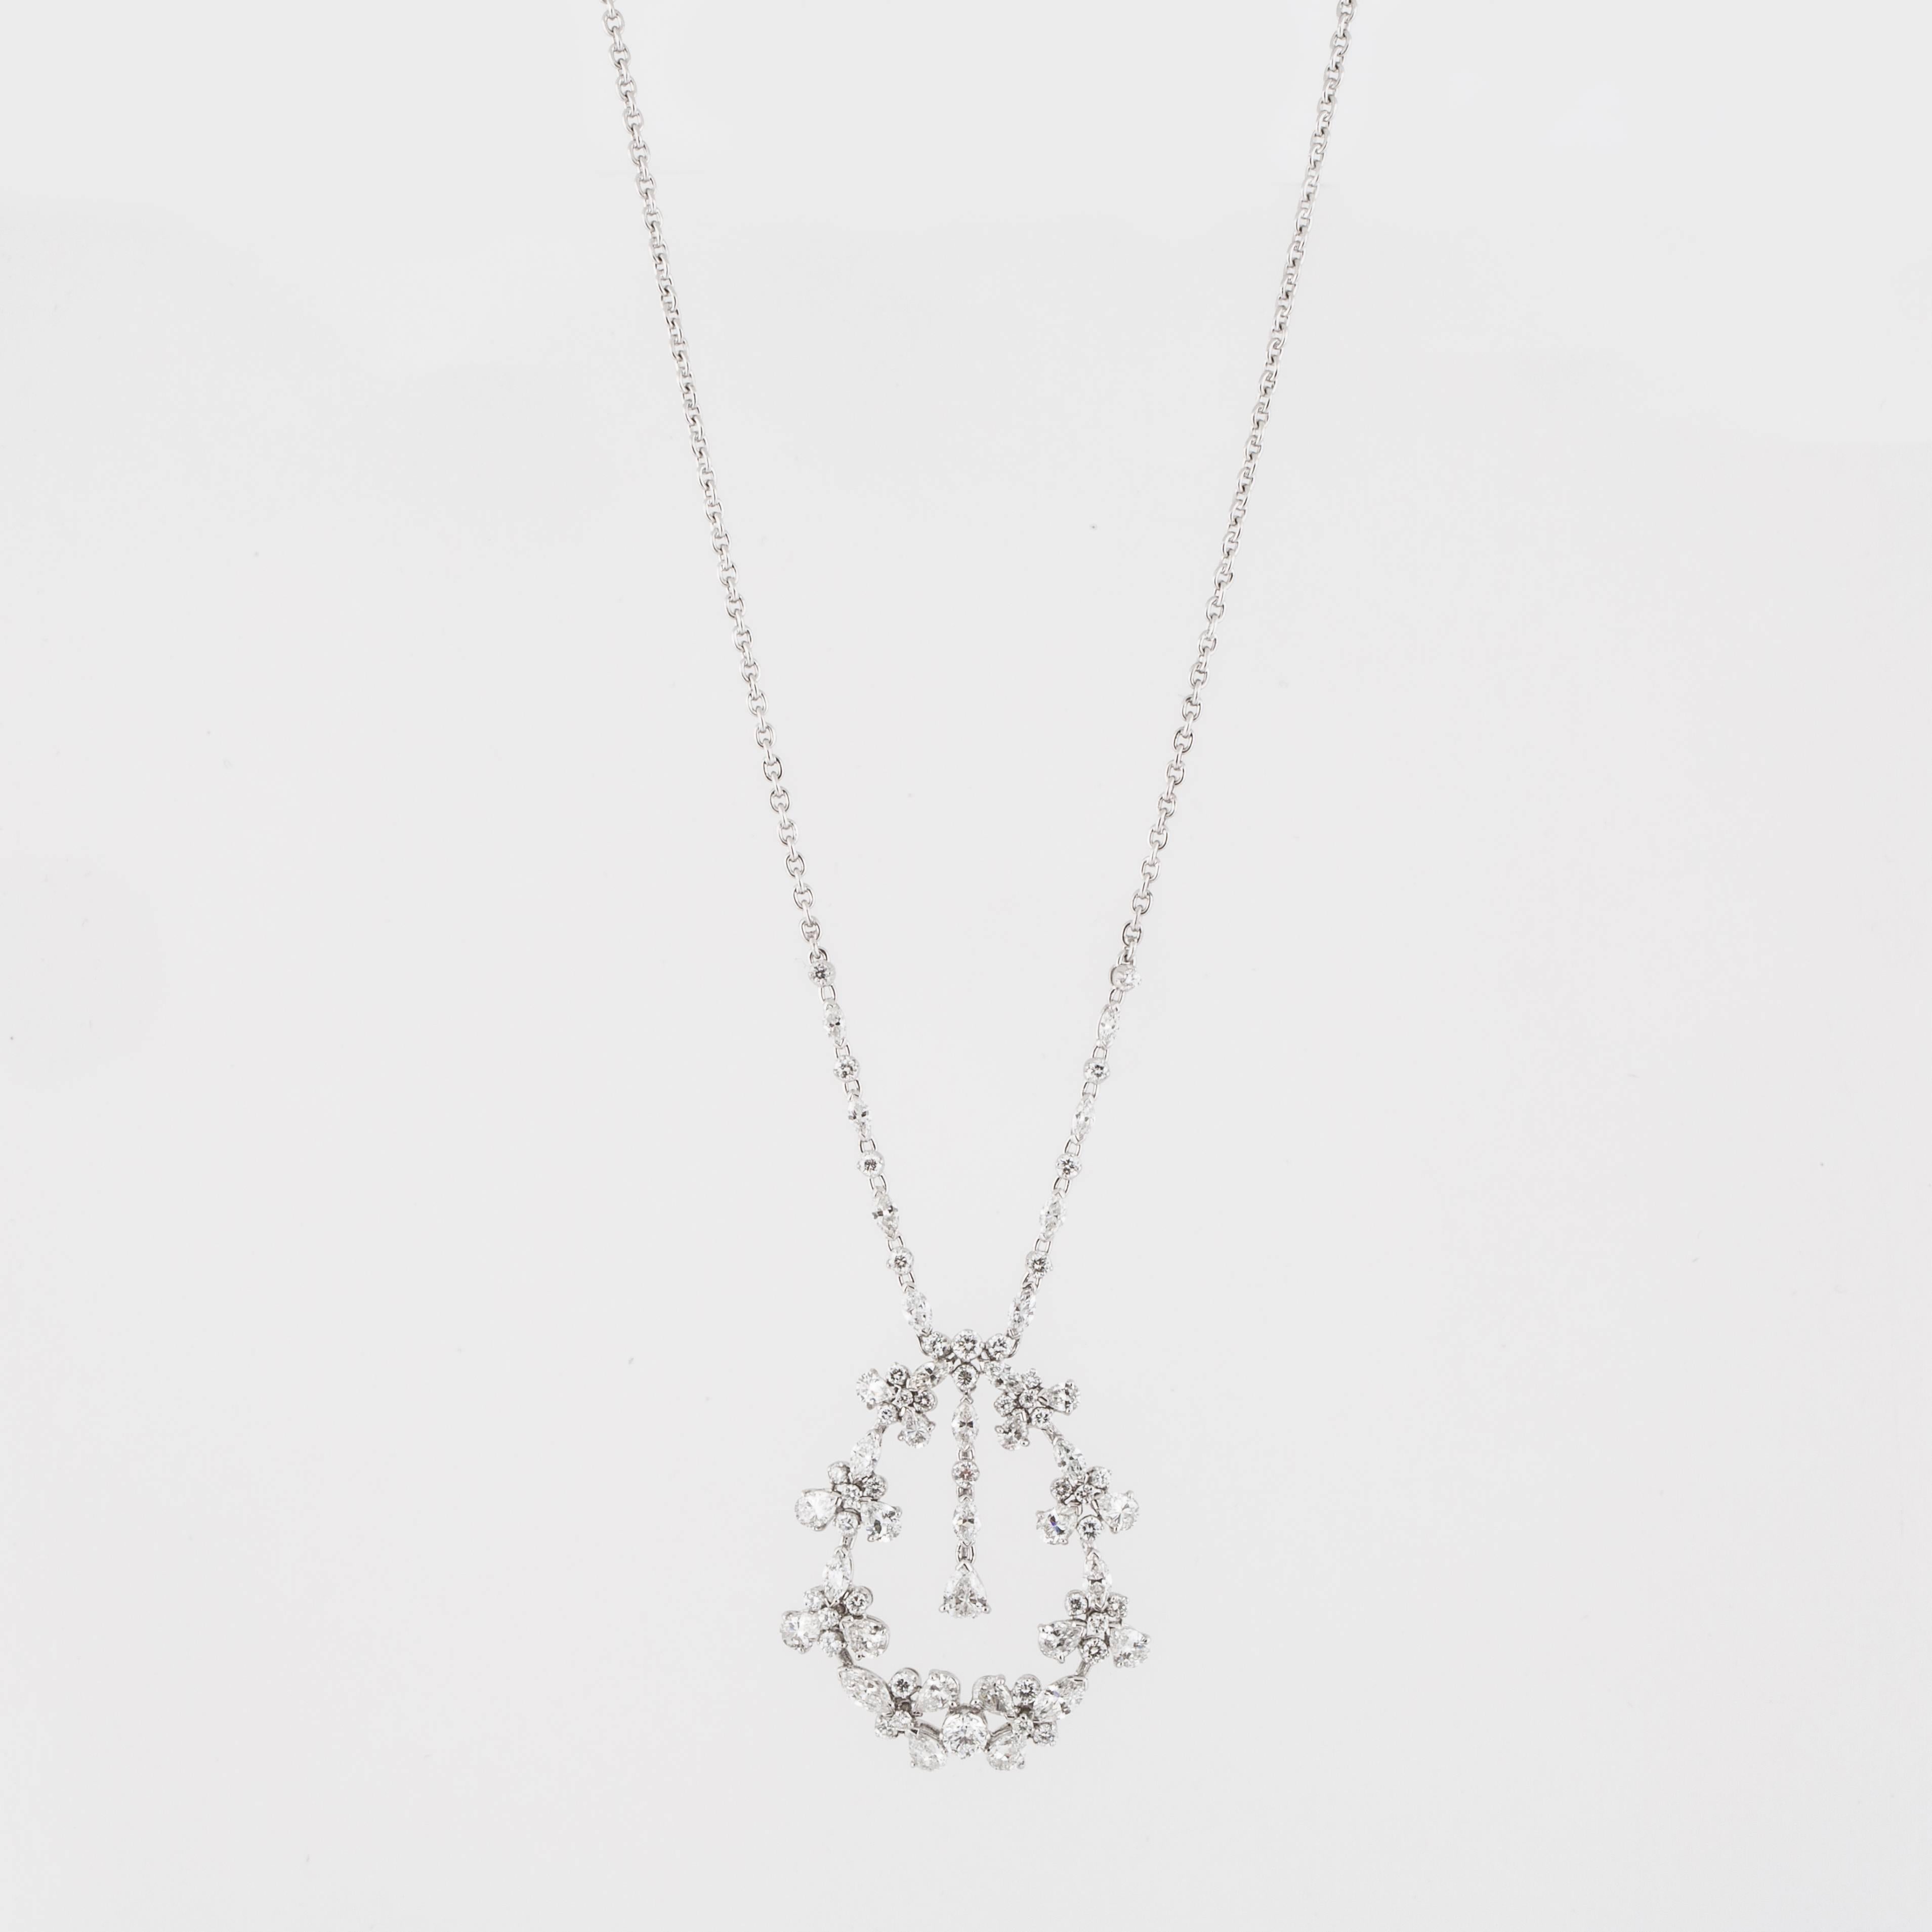 Estate 18K white gold diamond pendant necklace featuring a graduated center garland-inspired drop with tassel on a cable-link chain.  The drop pendant contains forty-six round diamonds, seventeen pear-shape diamonds and eighteen marquise-shape